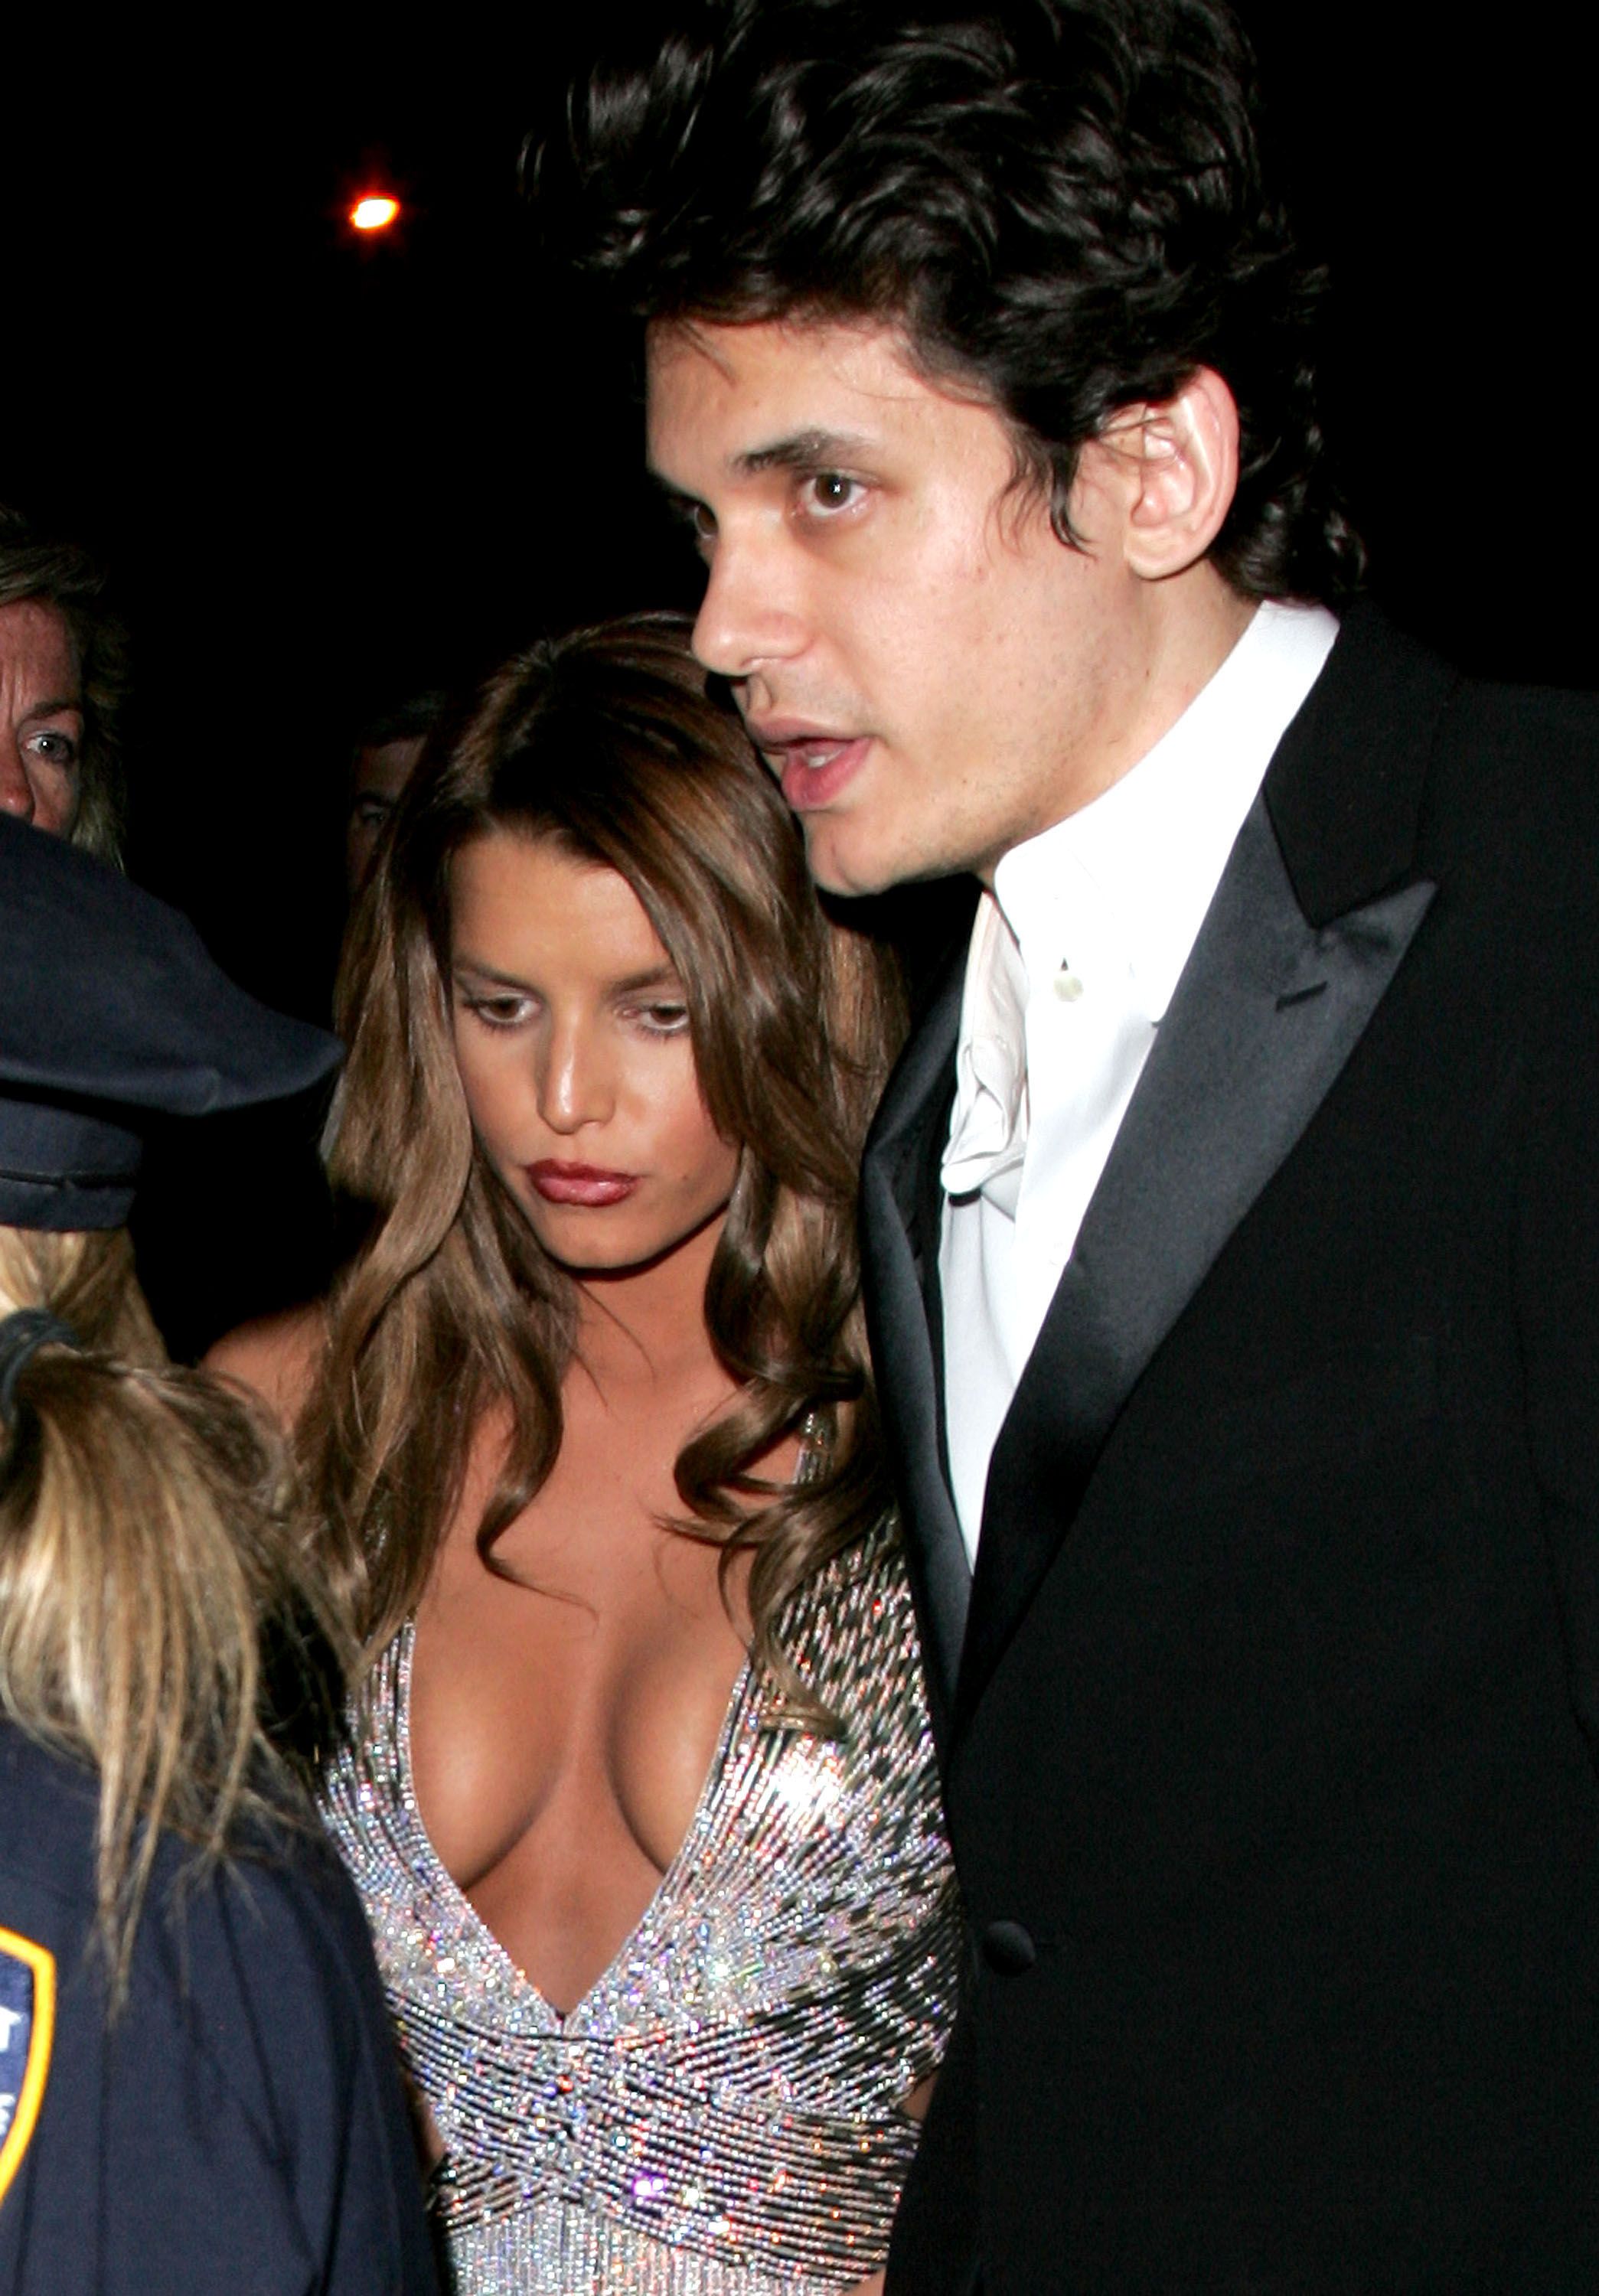 Jessica Simpson and former boyfriend John Mayer at 2007 Met Gala in New York City | Source: Getty Images